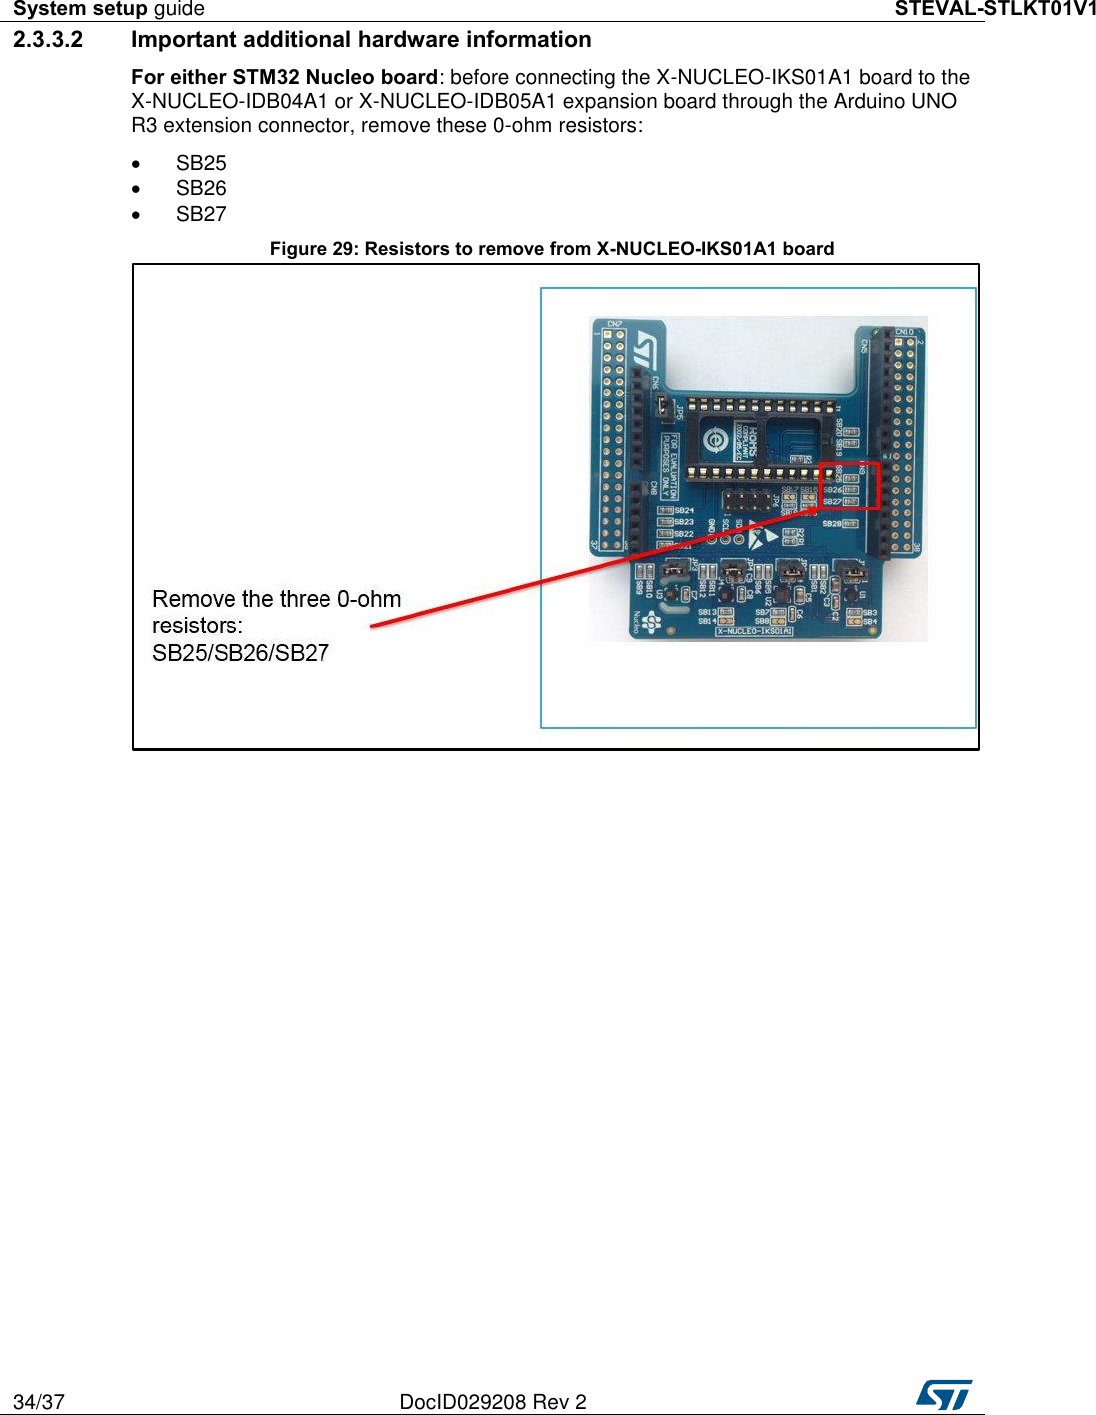 System setup guide STEVAL-STLKT01V1 34/37 DocID029208 Rev 2   2.3.3.2  Important additional hardware information For either STM32 Nucleo board: before connecting the X-NUCLEO-IKS01A1 board to the X-NUCLEO-IDB04A1 or X-NUCLEO-IDB05A1 expansion board through the Arduino UNO R3 extension connector, remove these 0-ohm resistors:   SB25   SB26   SB27 Figure 29: Resistors to remove from X-NUCLEO-IKS01A1 board  